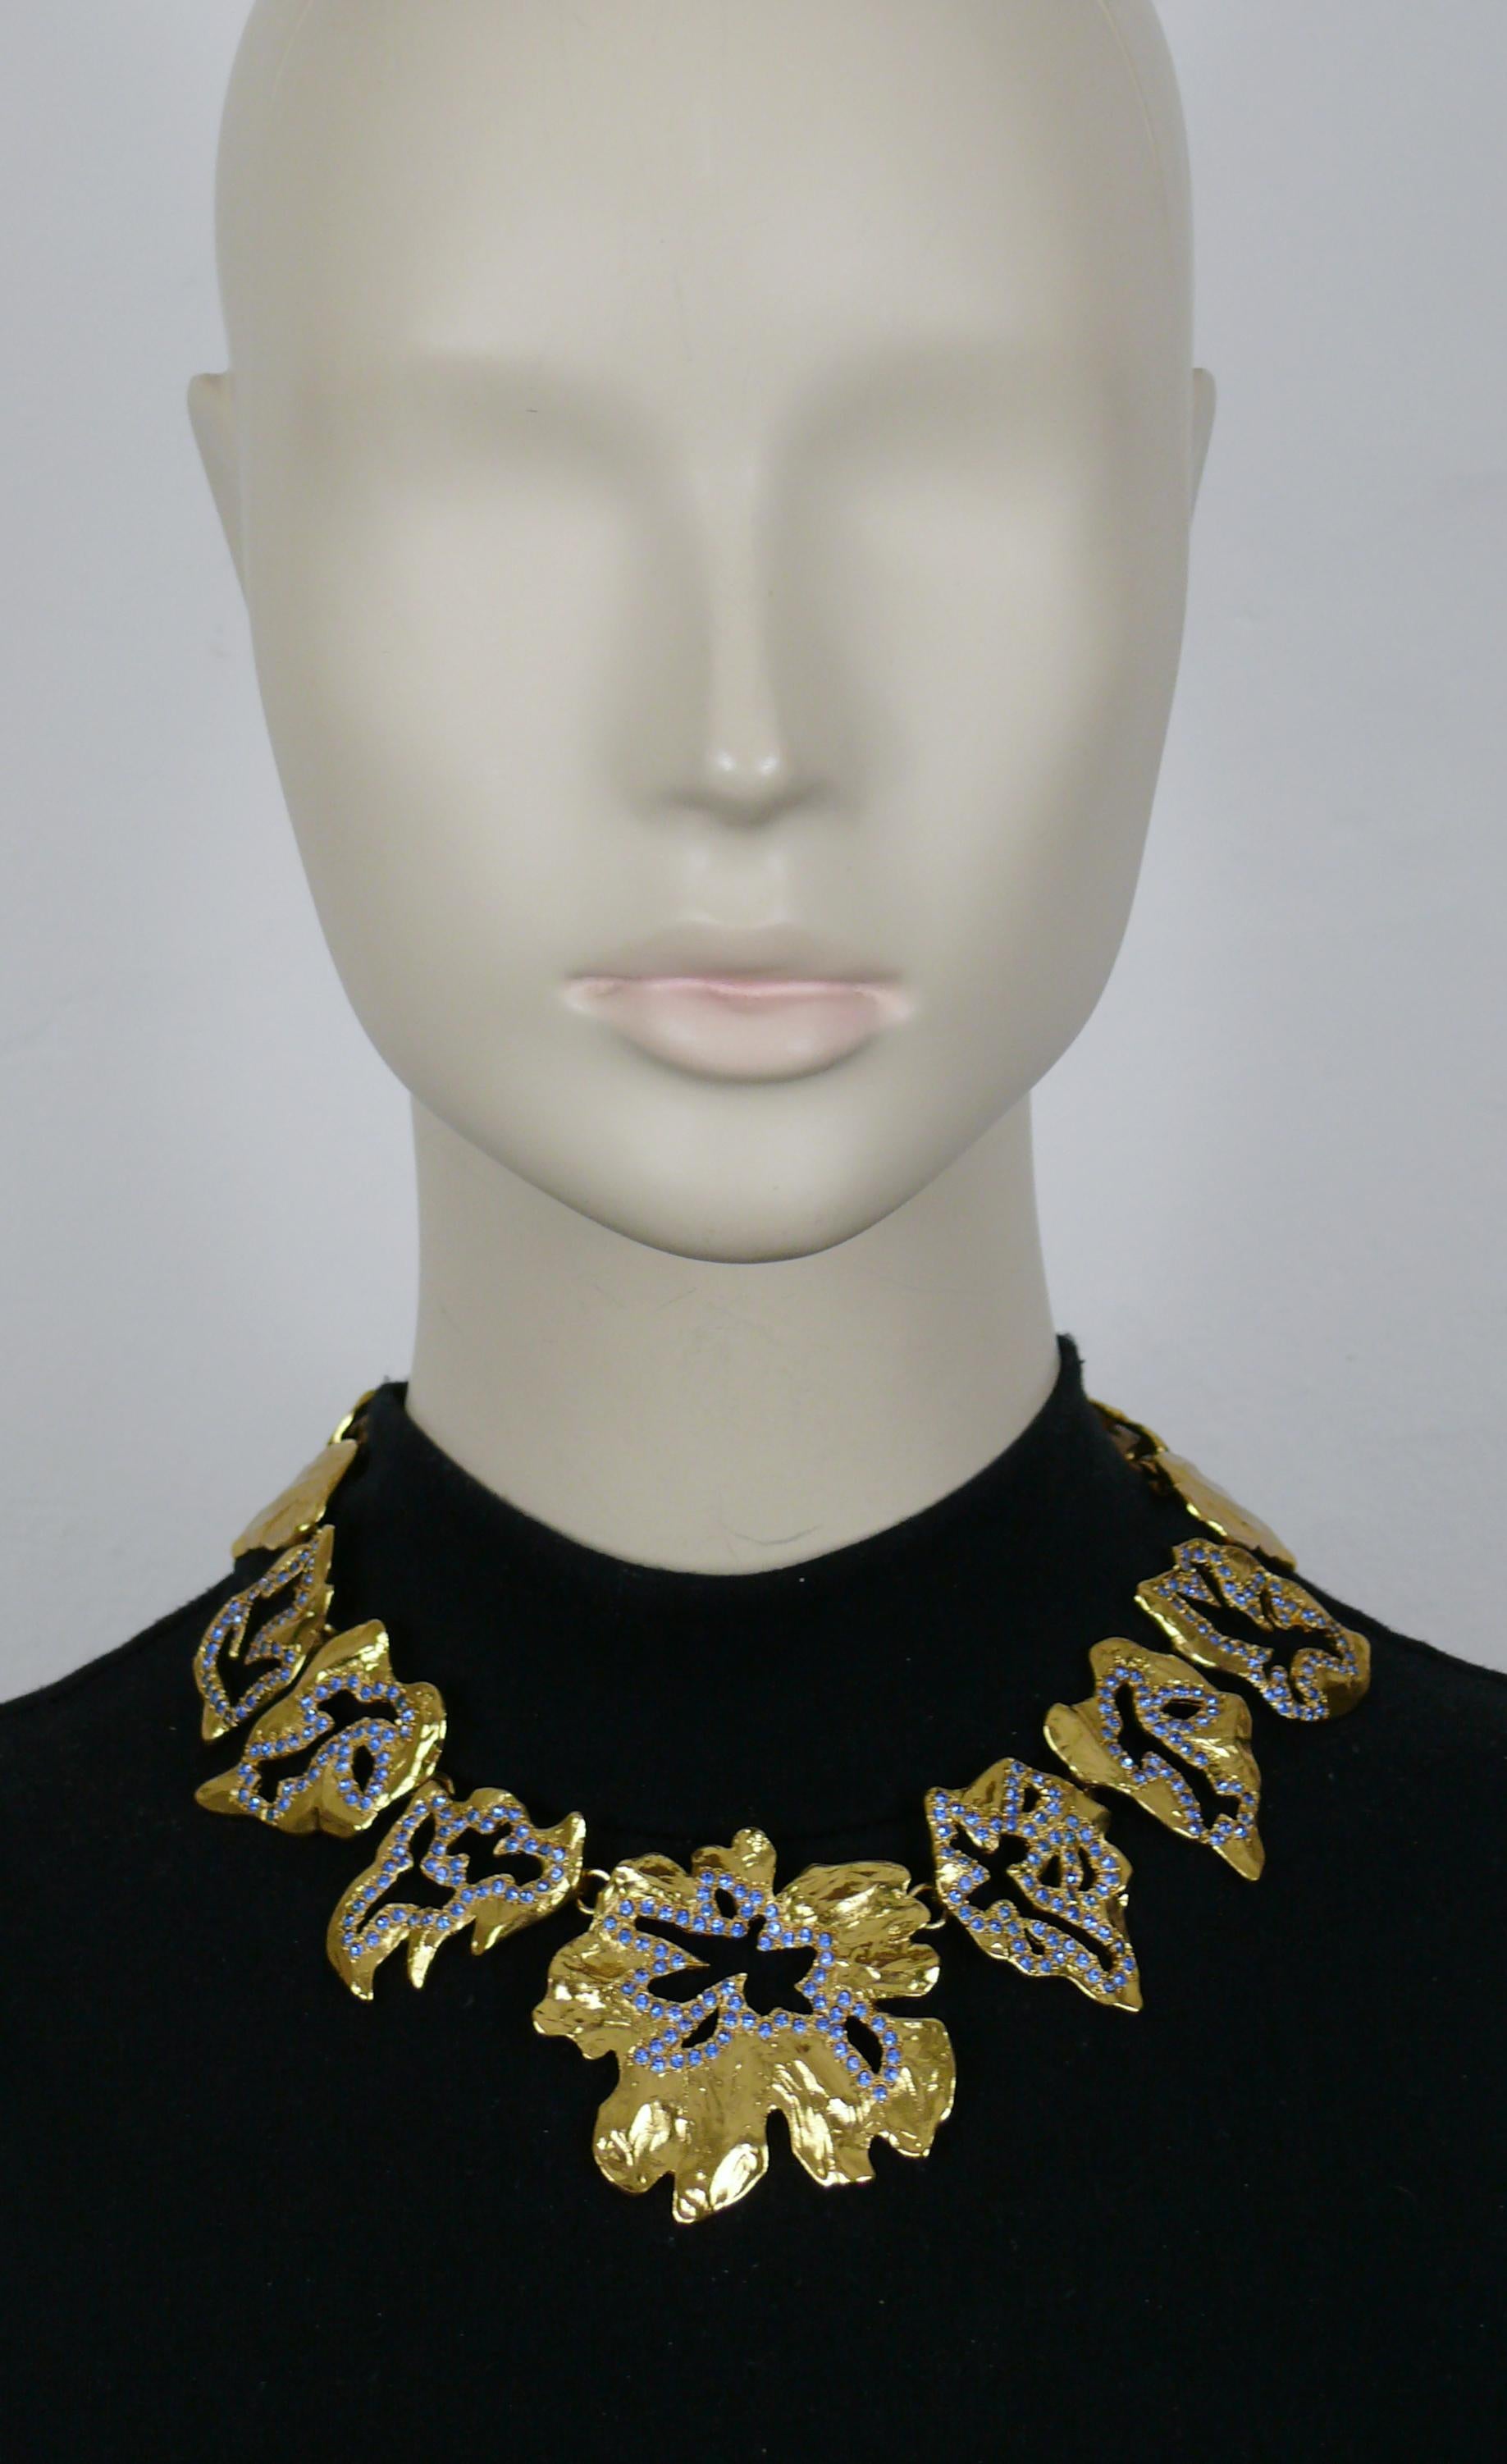 YVES SAINT LAURENT vintage gold tone necklace featuring textured openwork links embellished with blue colour crystals.

Adjustable T-bar closure.

Embossed YSL Made in France.

Indicative measurements : adjustable length from approx. 39 cm (15.35